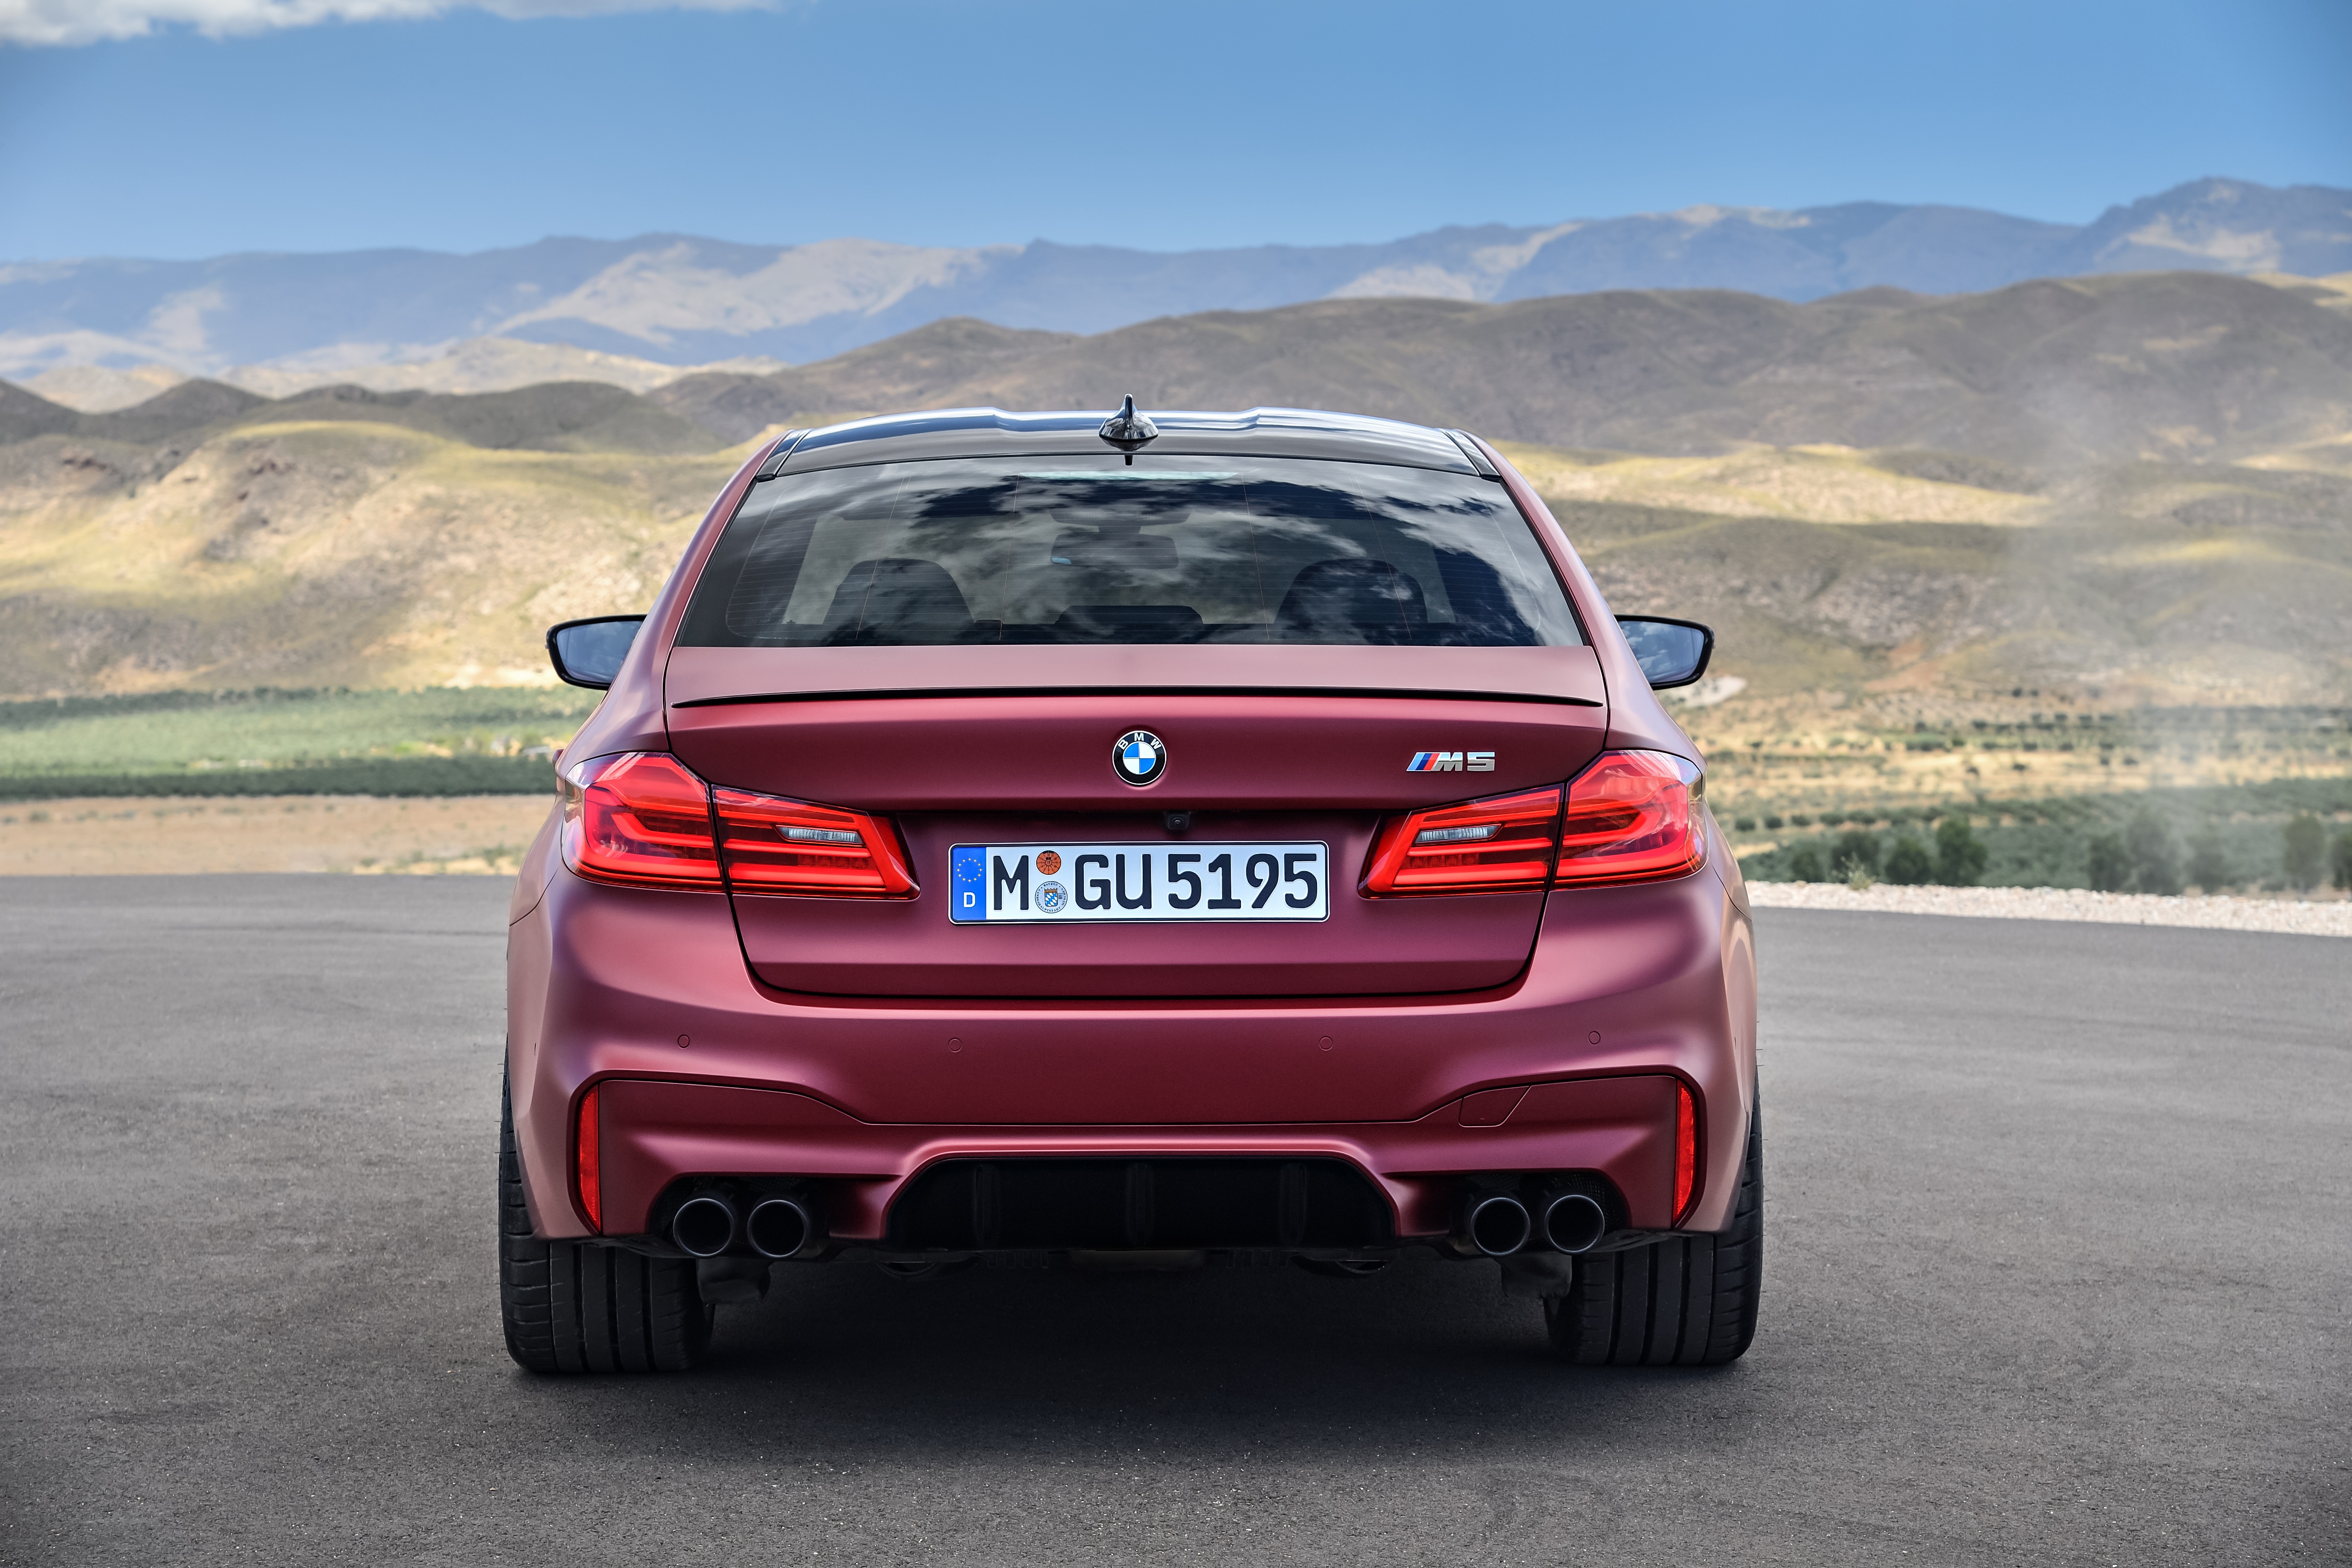 Бмв м5 про. БМВ m5 f90. BMW m5 f90 2018. BMW m5 f90 2017. BMW m5 f90 first Edition.